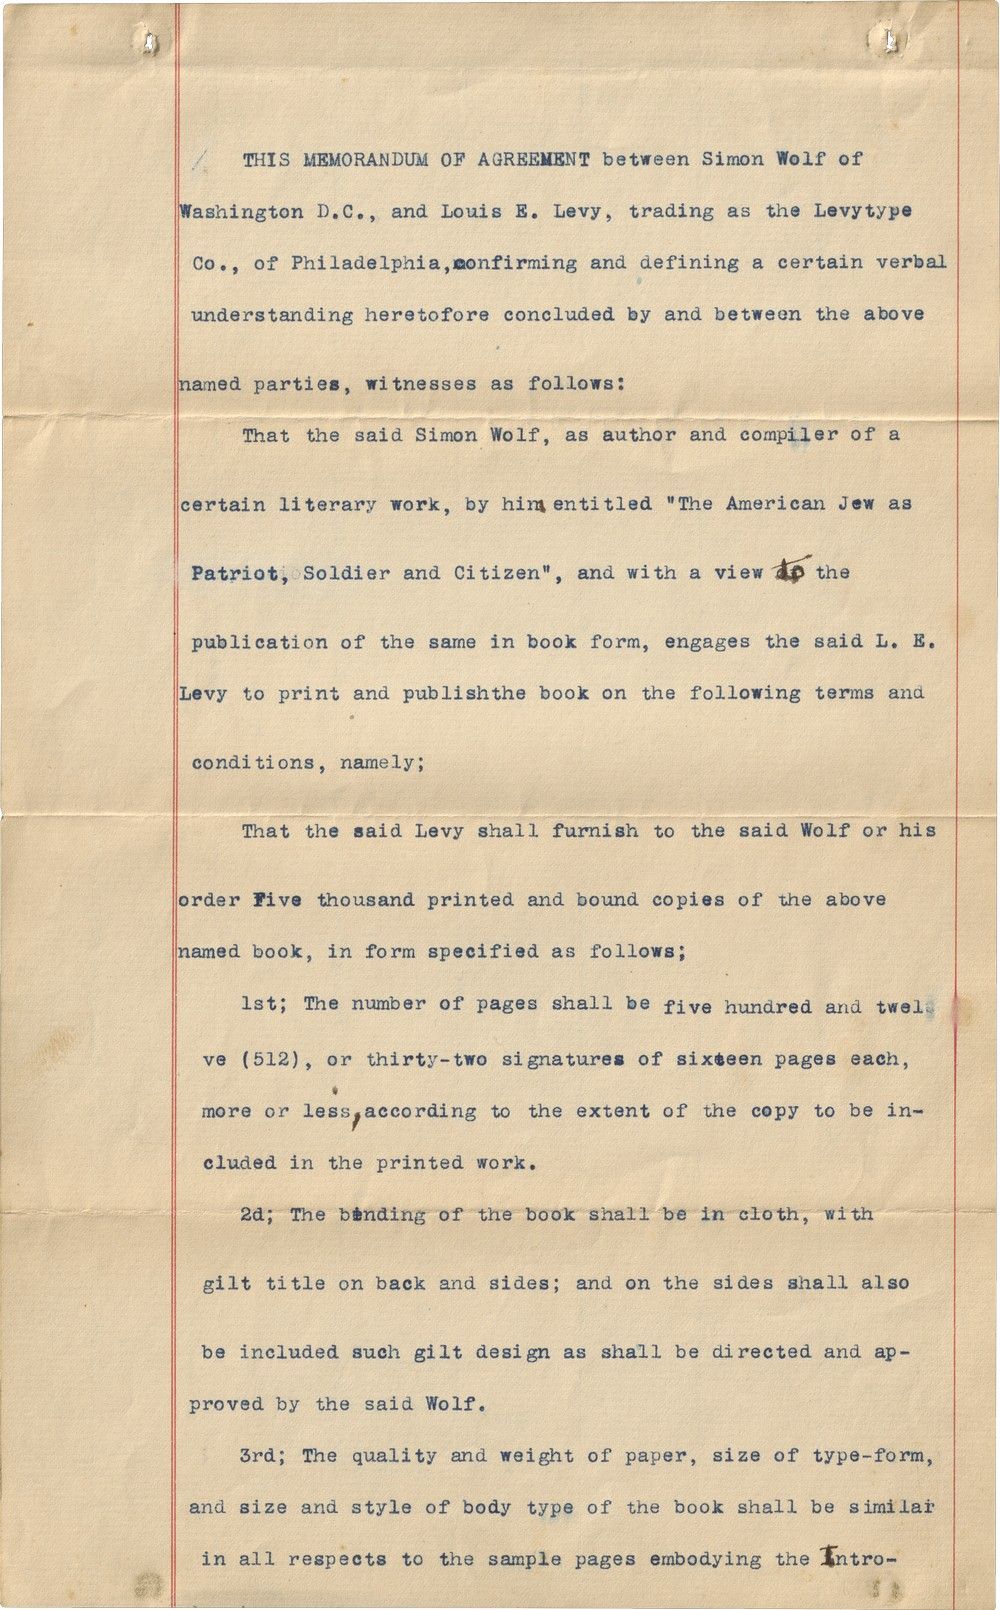 Simon Wolf's Original Contract For the Book "The American Jew as Patriot, Soldier, and Citizen"